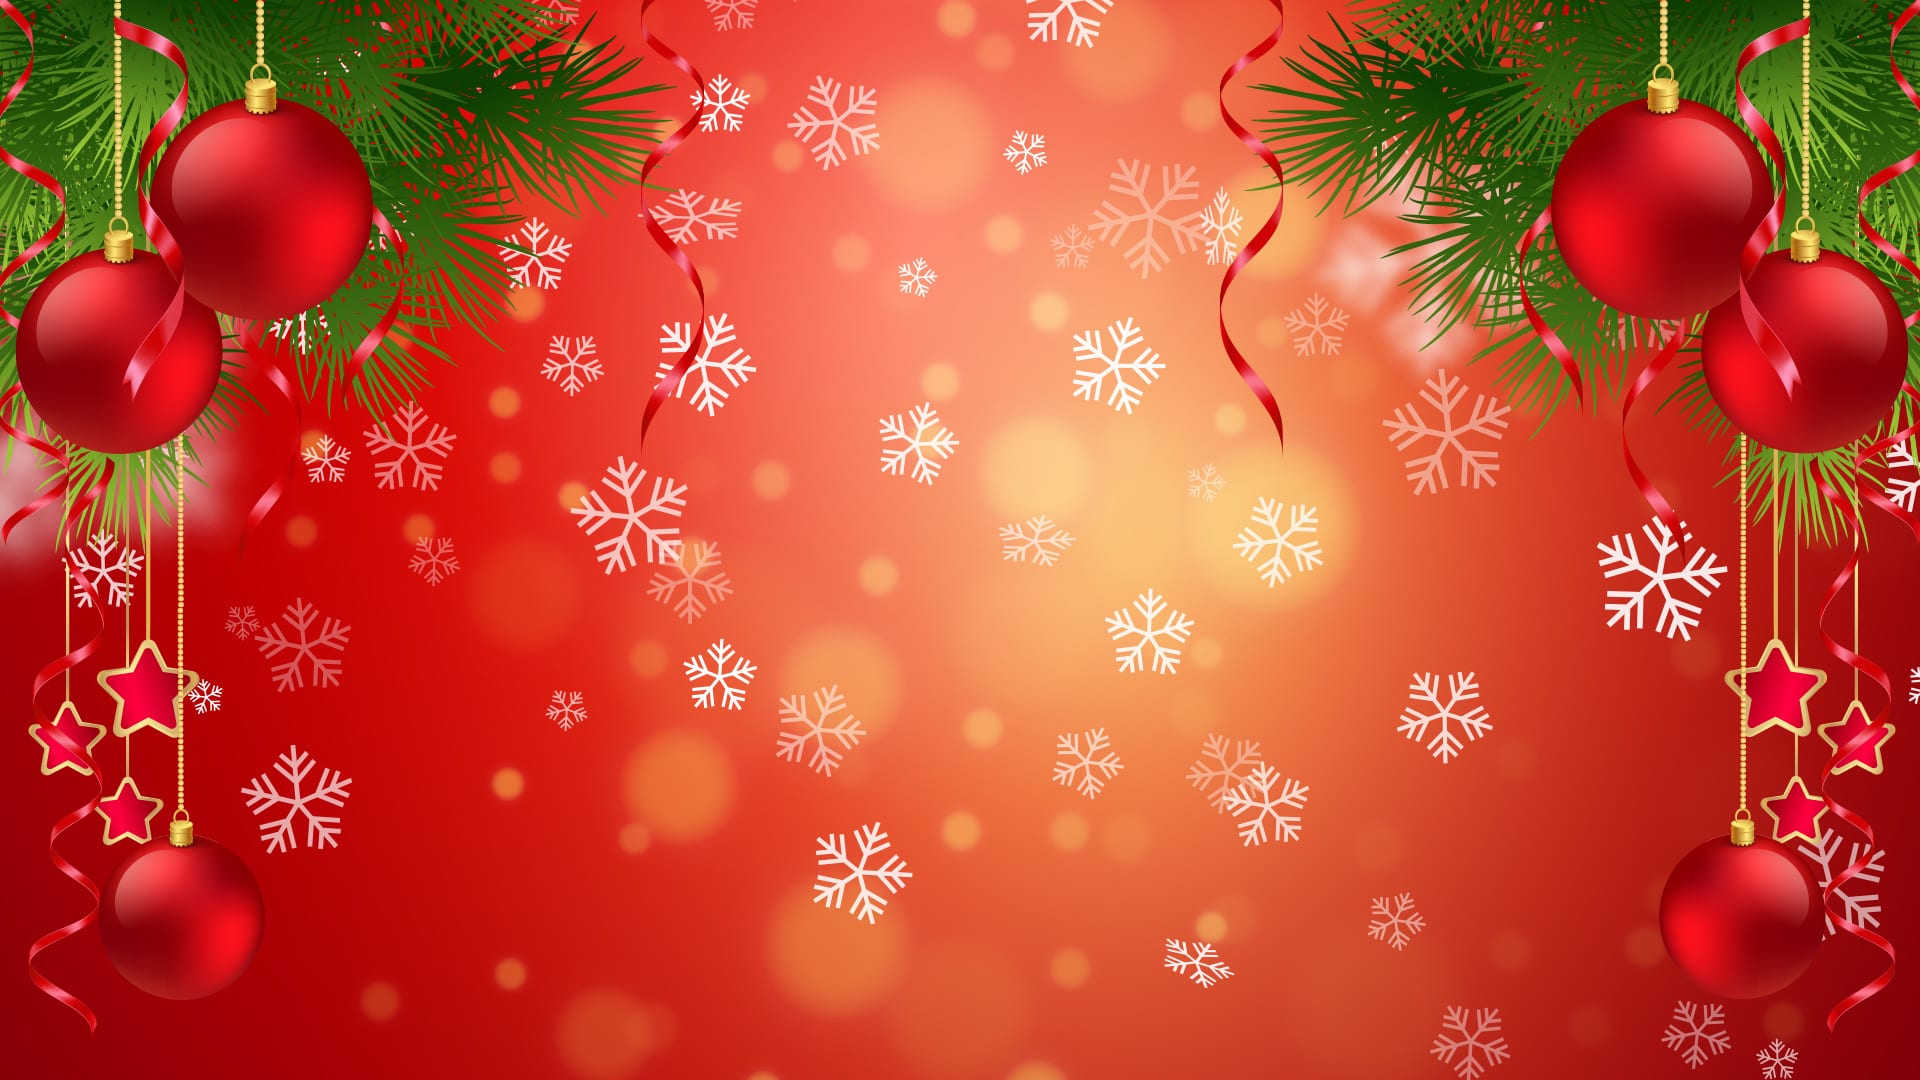 20 Beautiful Christmas Wallpapers and Backgrounds in Full HD • AtulHost